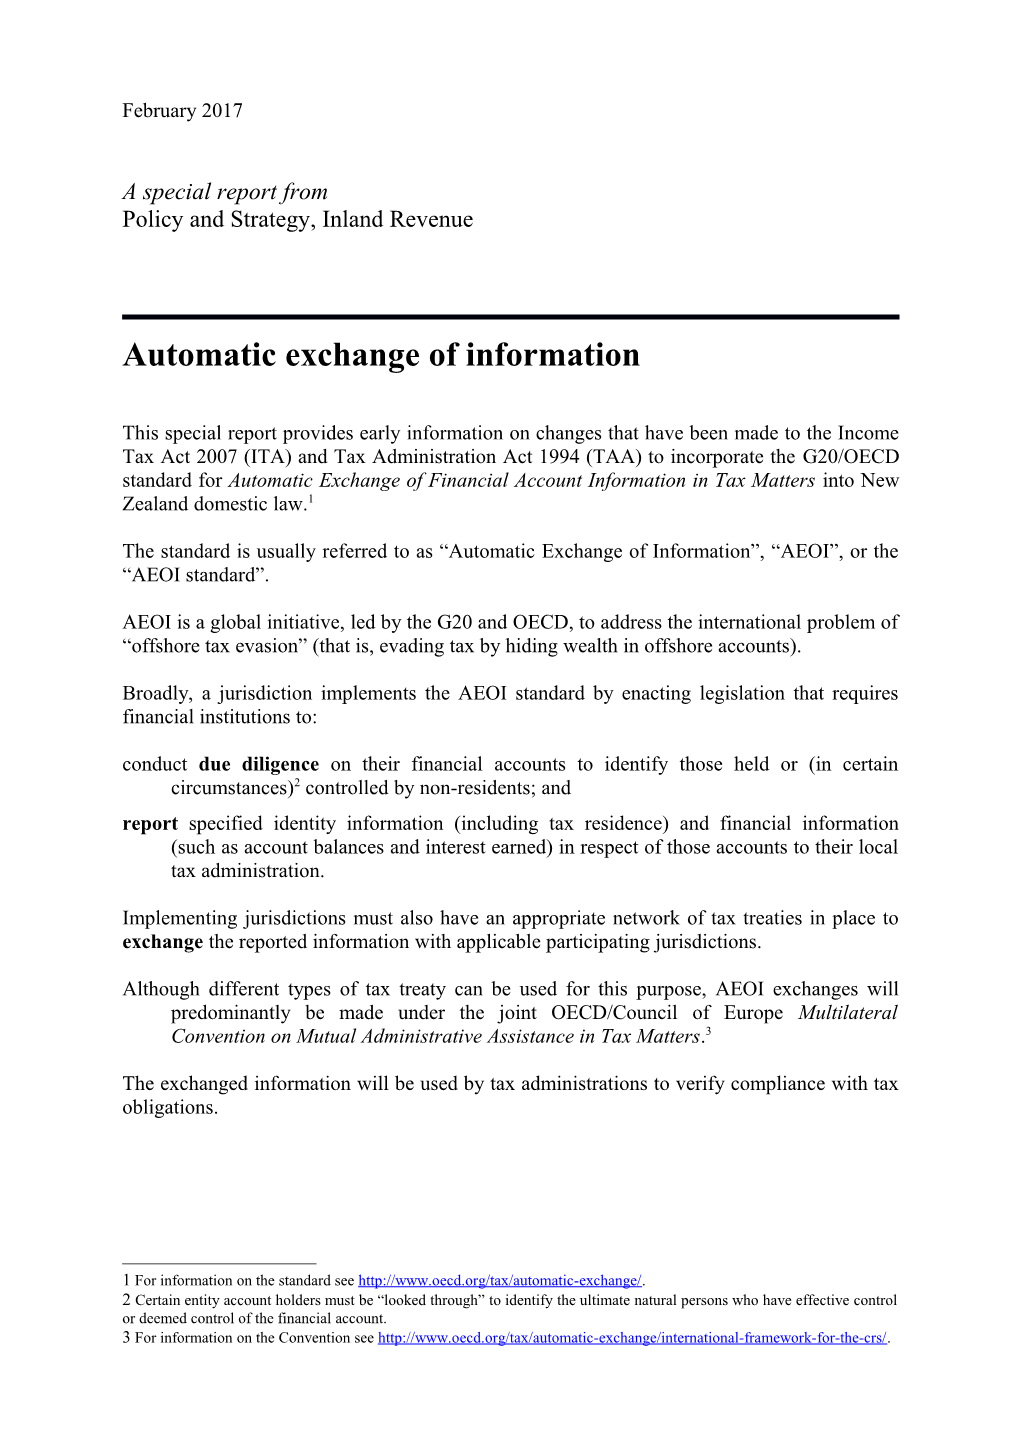 Special Report on Automatic Exchange of Information (February 2017)